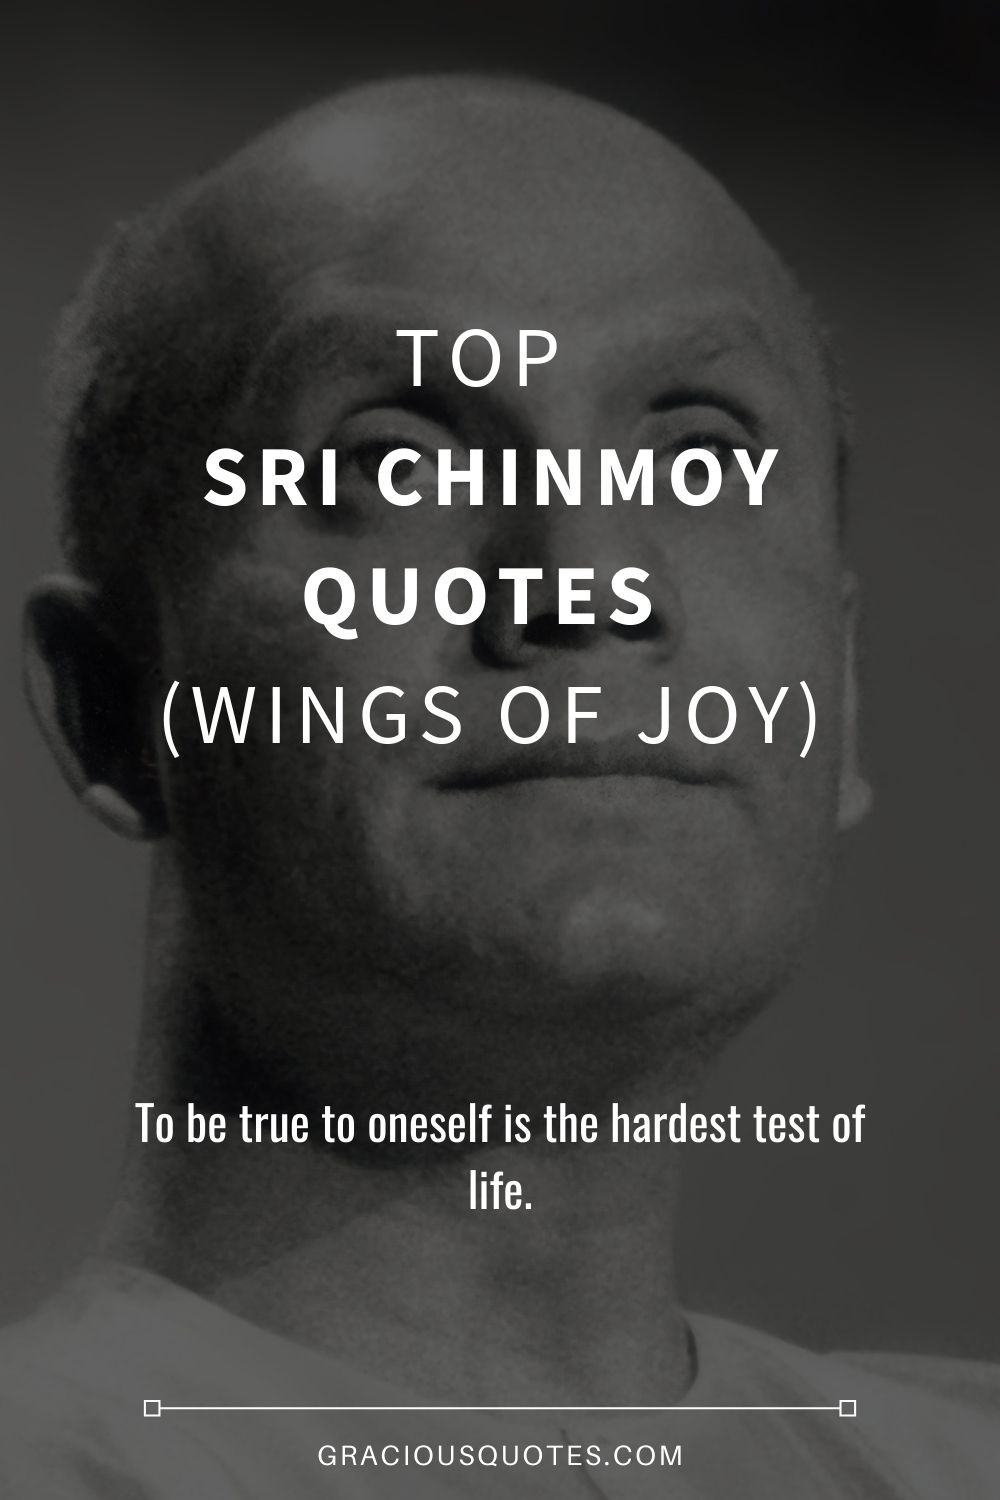 Top Sri Chinmoy Quotes (WINGS OF JOY) - Gracious Quotes